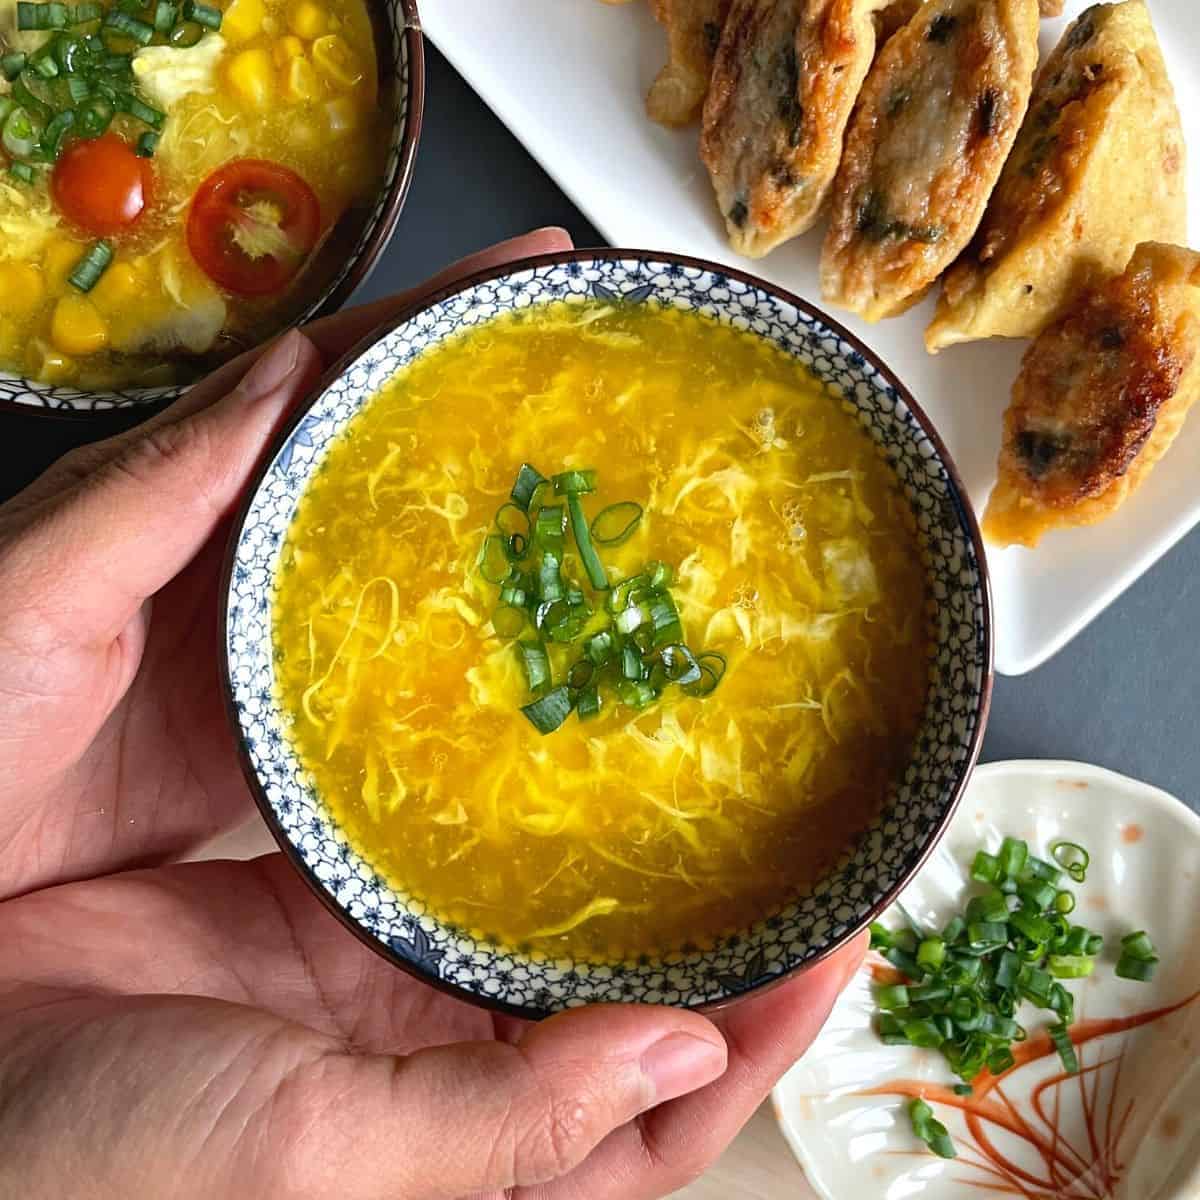 How to make Egg flower soup at home